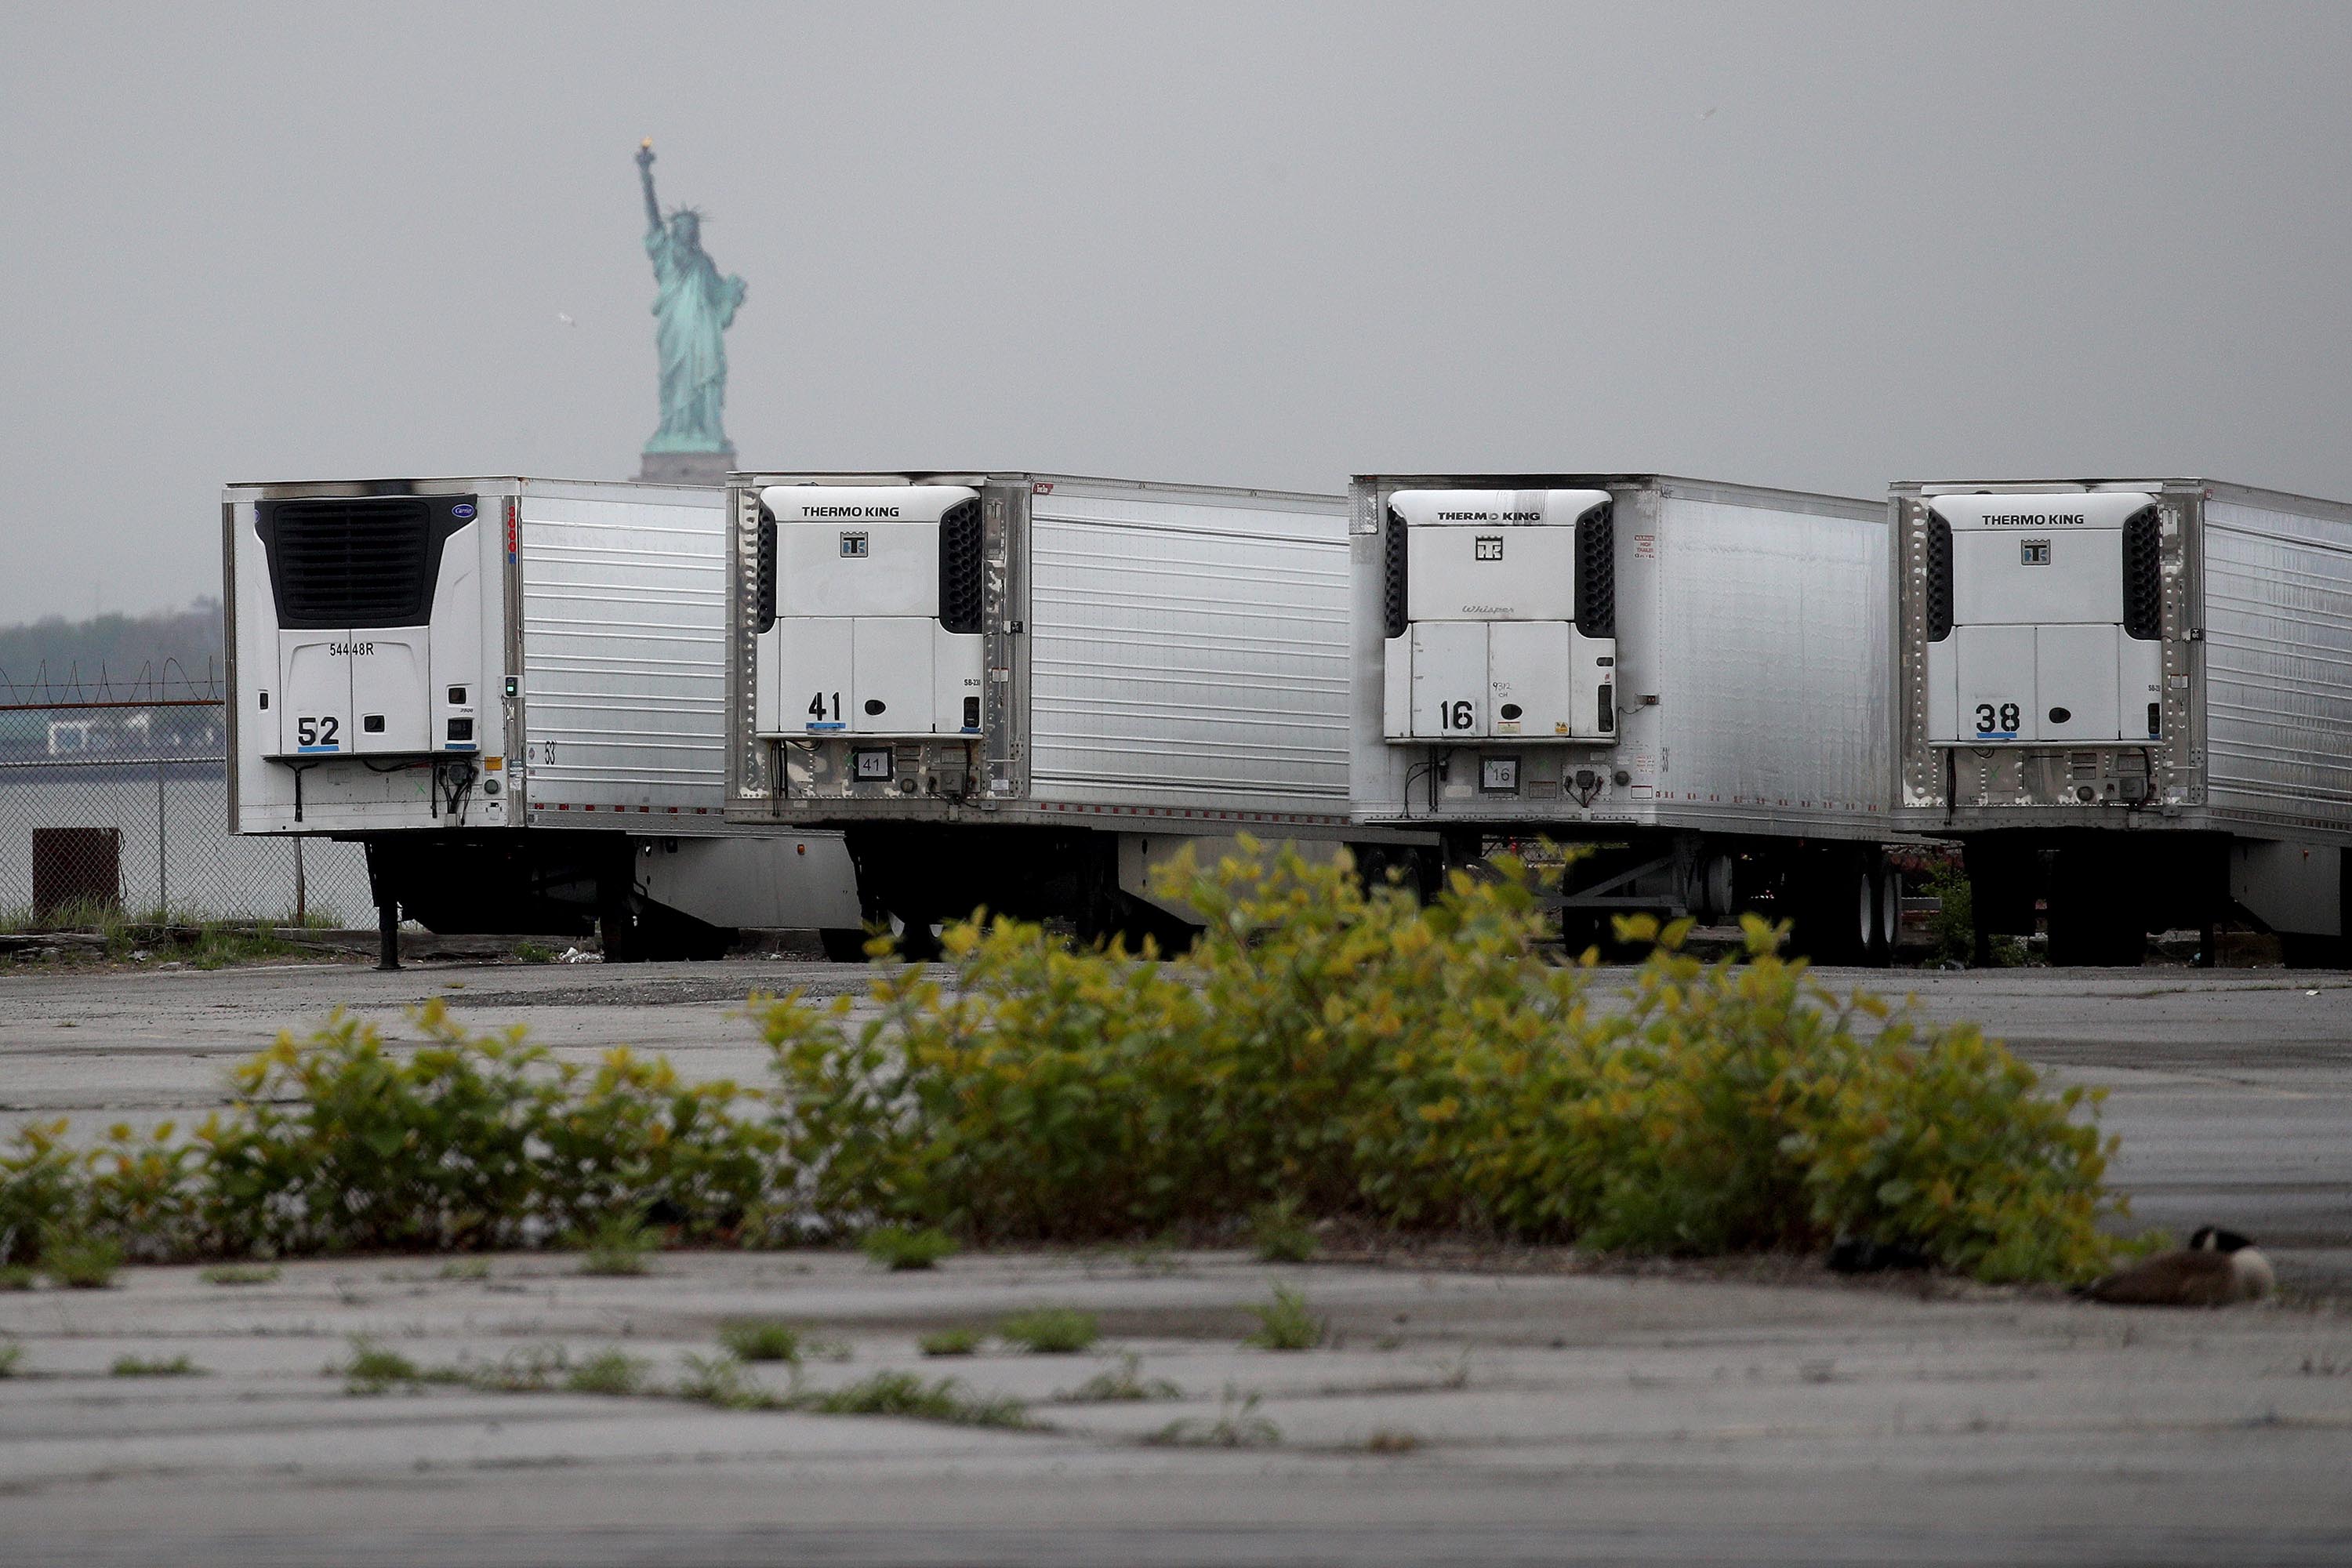 Refrigerated trucks functioning as temporary morgues for coronavirus victims are seen at the South Brooklyn Marine Terminal in New York City on May 6.